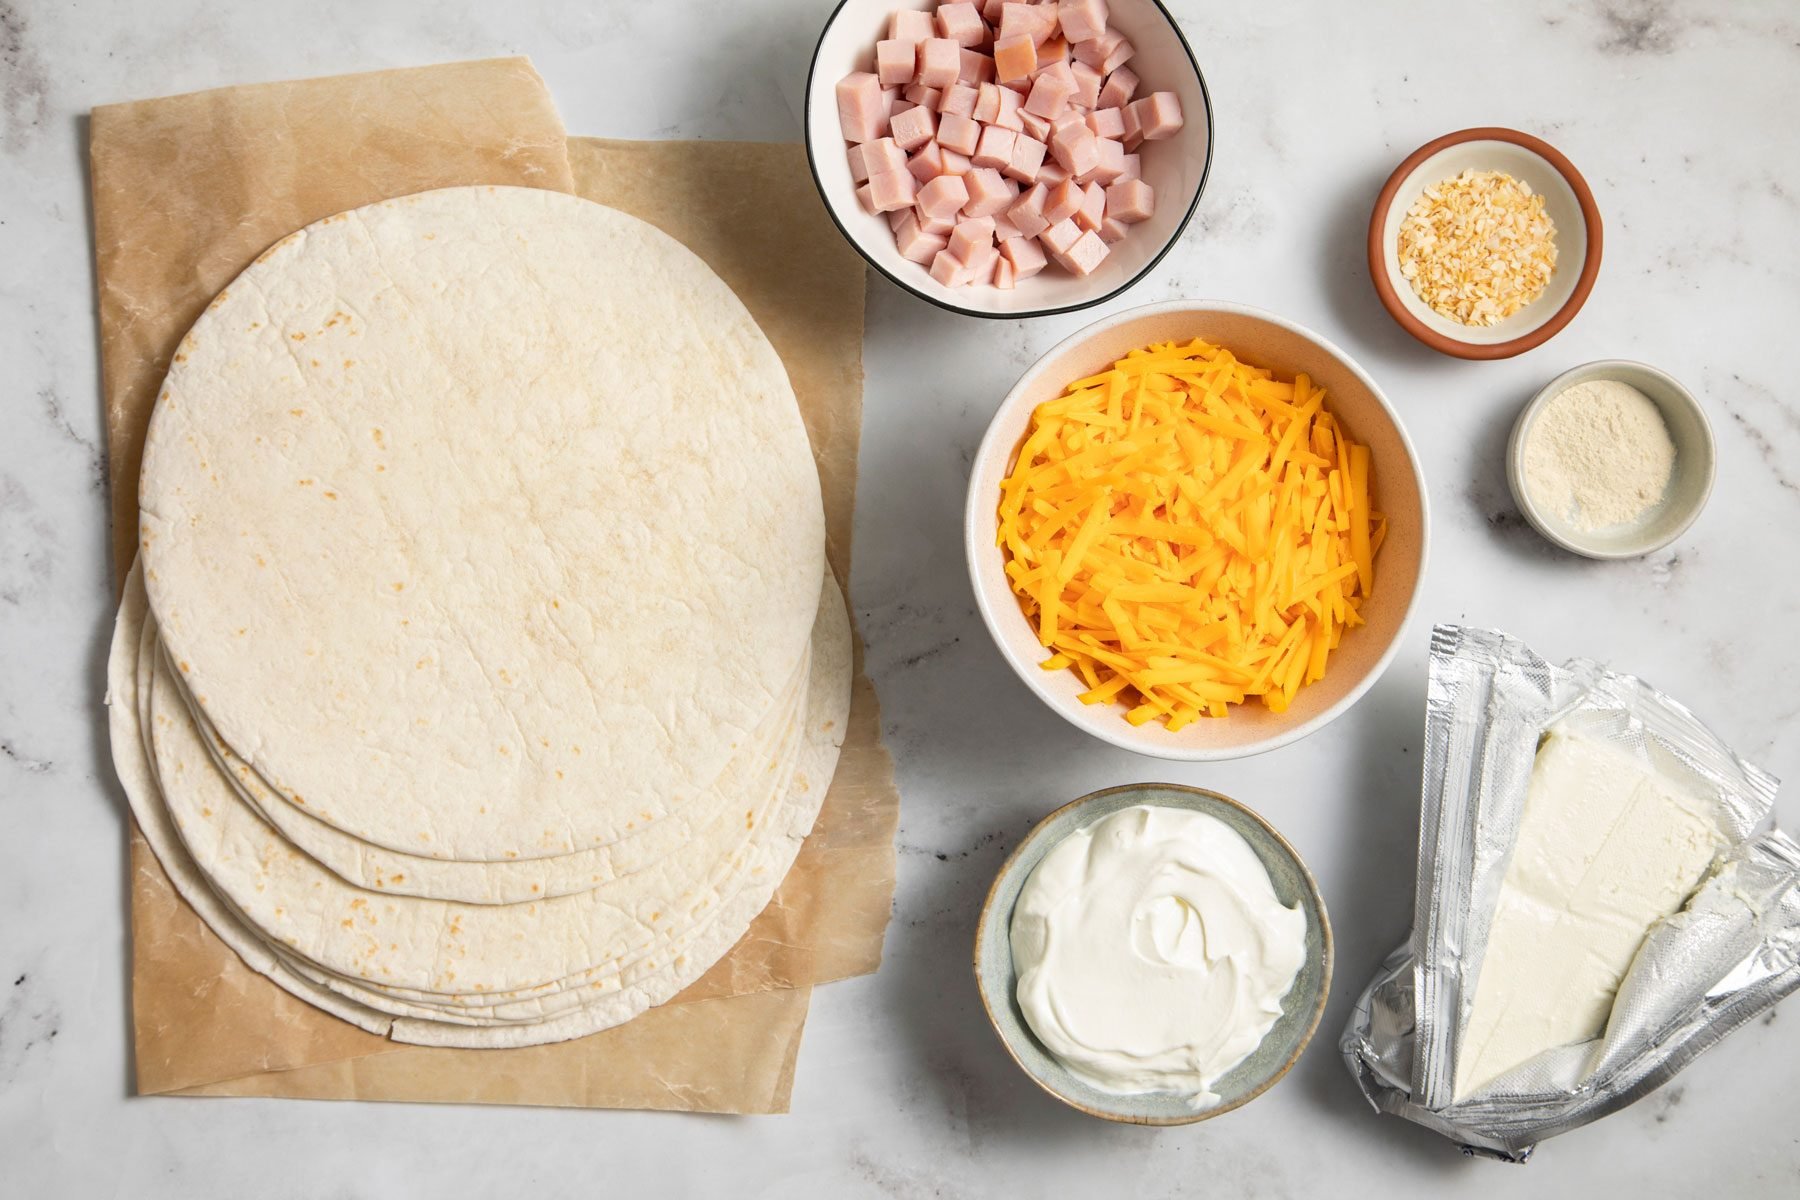 Ingredients for Ham And Cheese Roll Ups